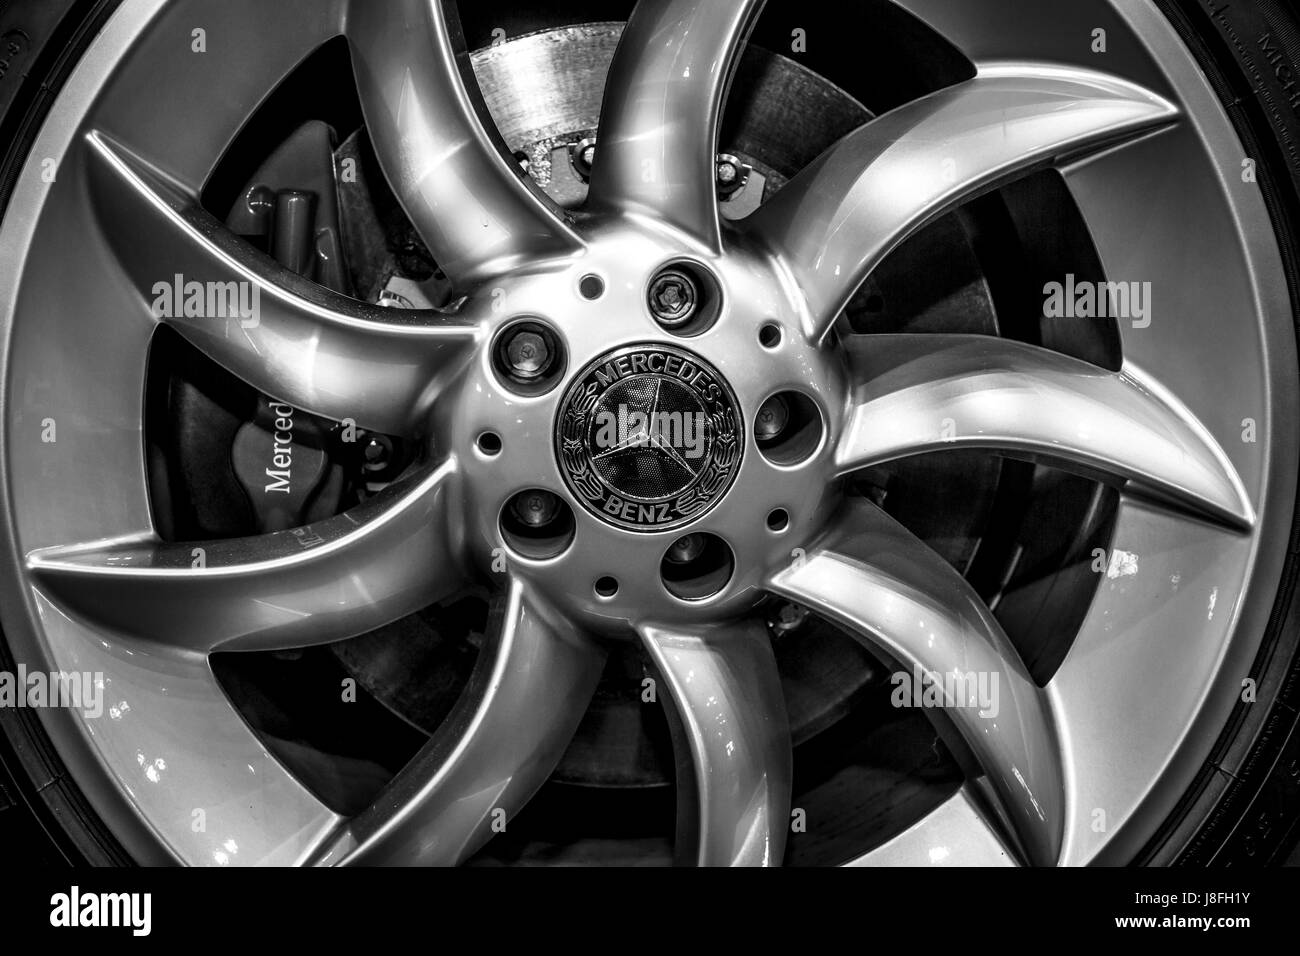 STUTTGART, GERMANY - MARCH 04, 2017: Wheel and brake system of Mercedes-Benz SLR McLaren. Black and white. Europe's greatest classic car exhibition "R Stock Photo